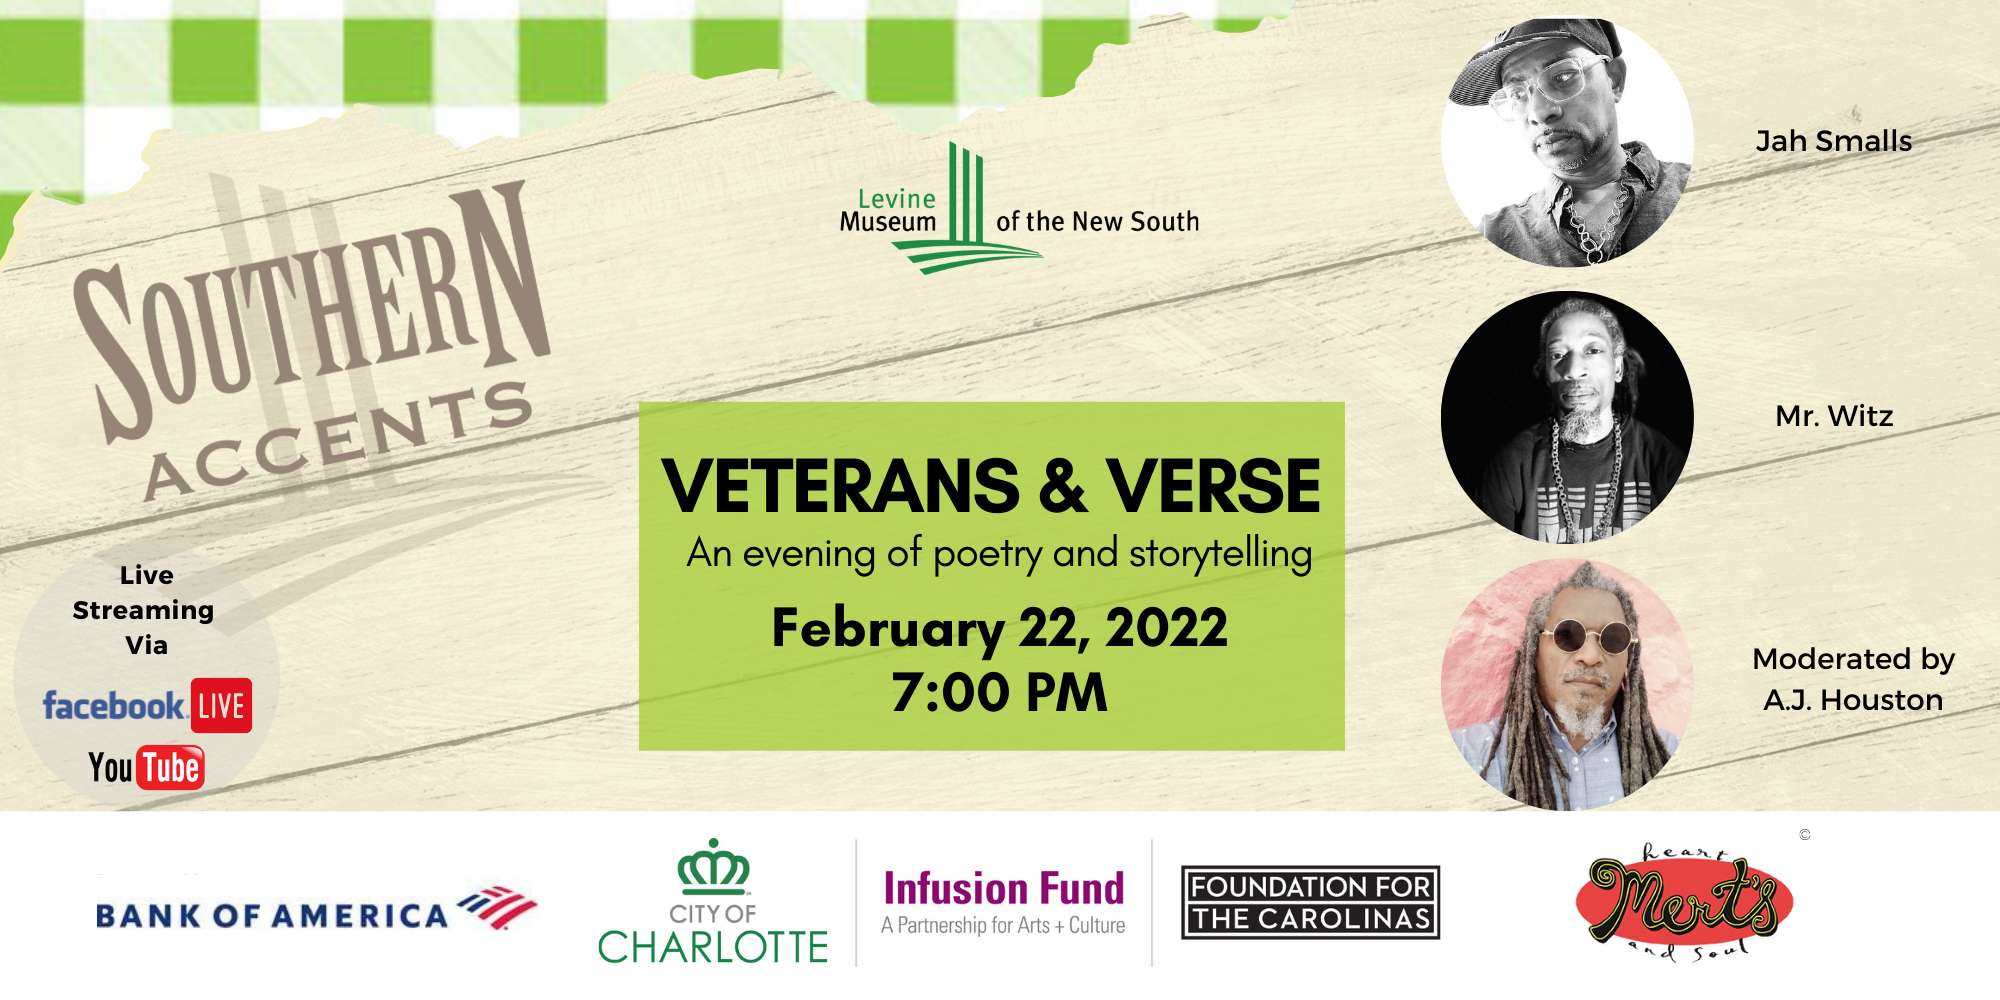 Levine Museum of the New South Southern Accents: Veterans & Verse Event Image